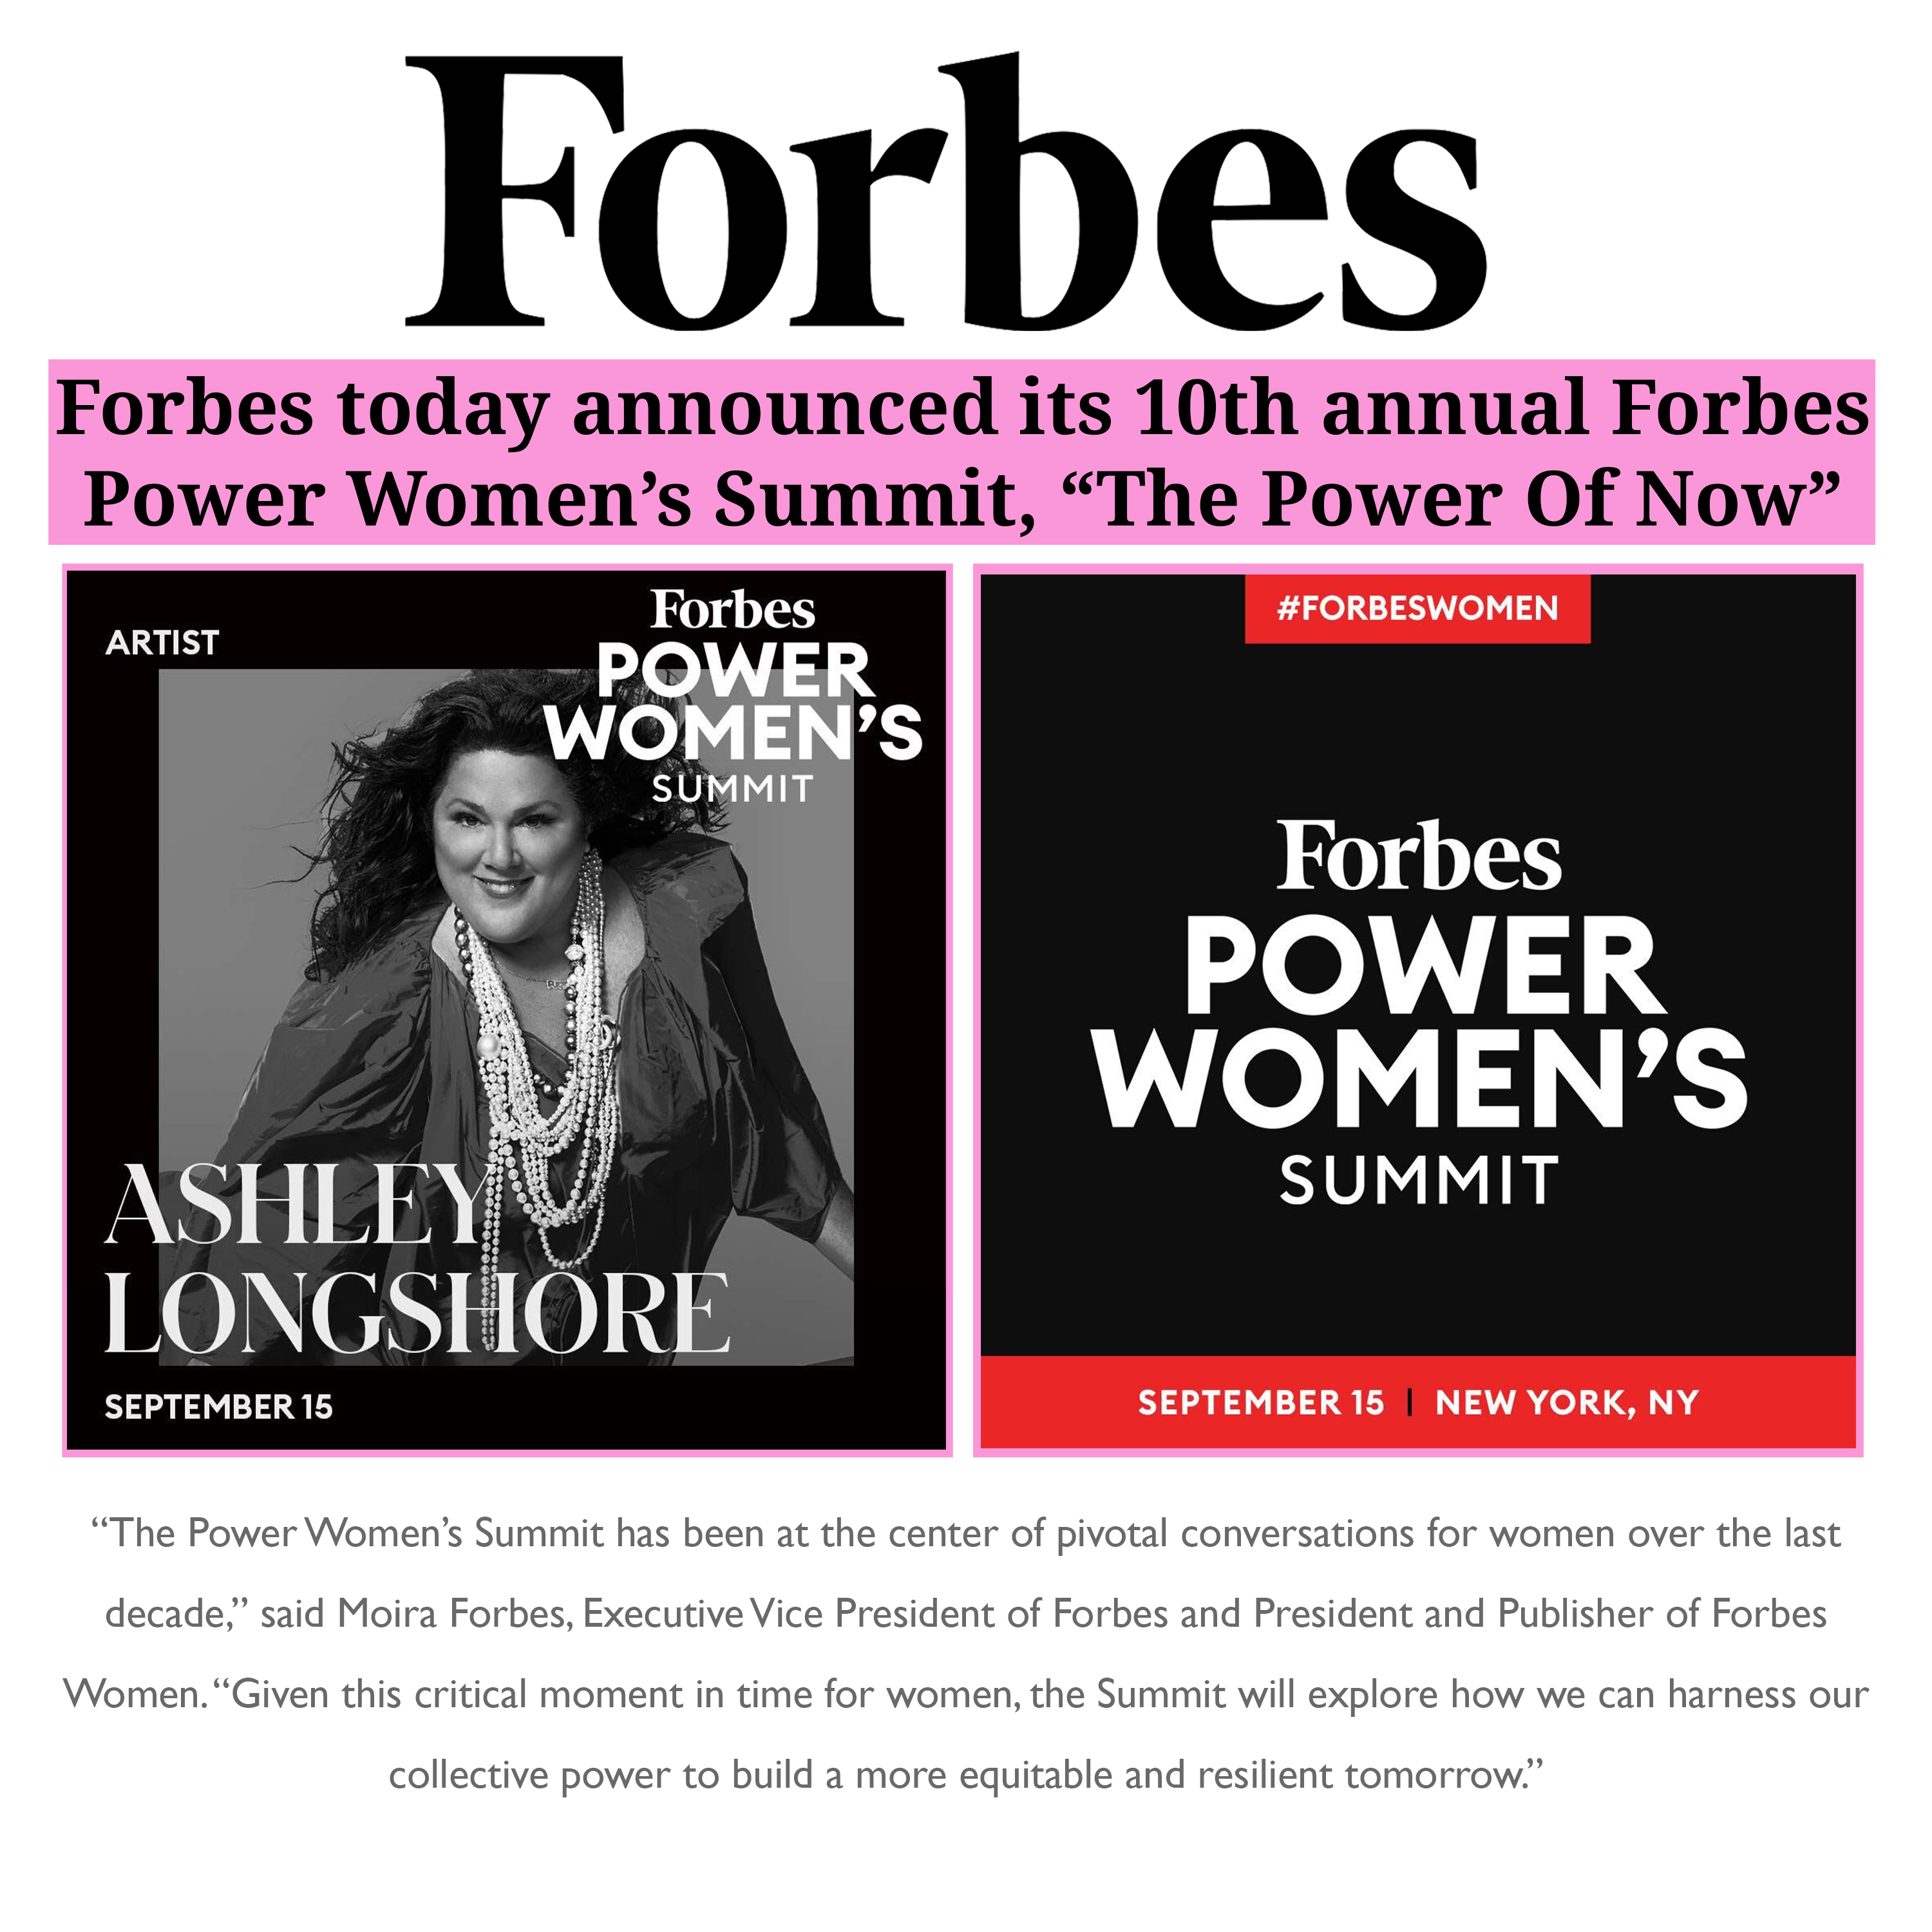 Forbes Announces 10th Annual Power Women’s Summit